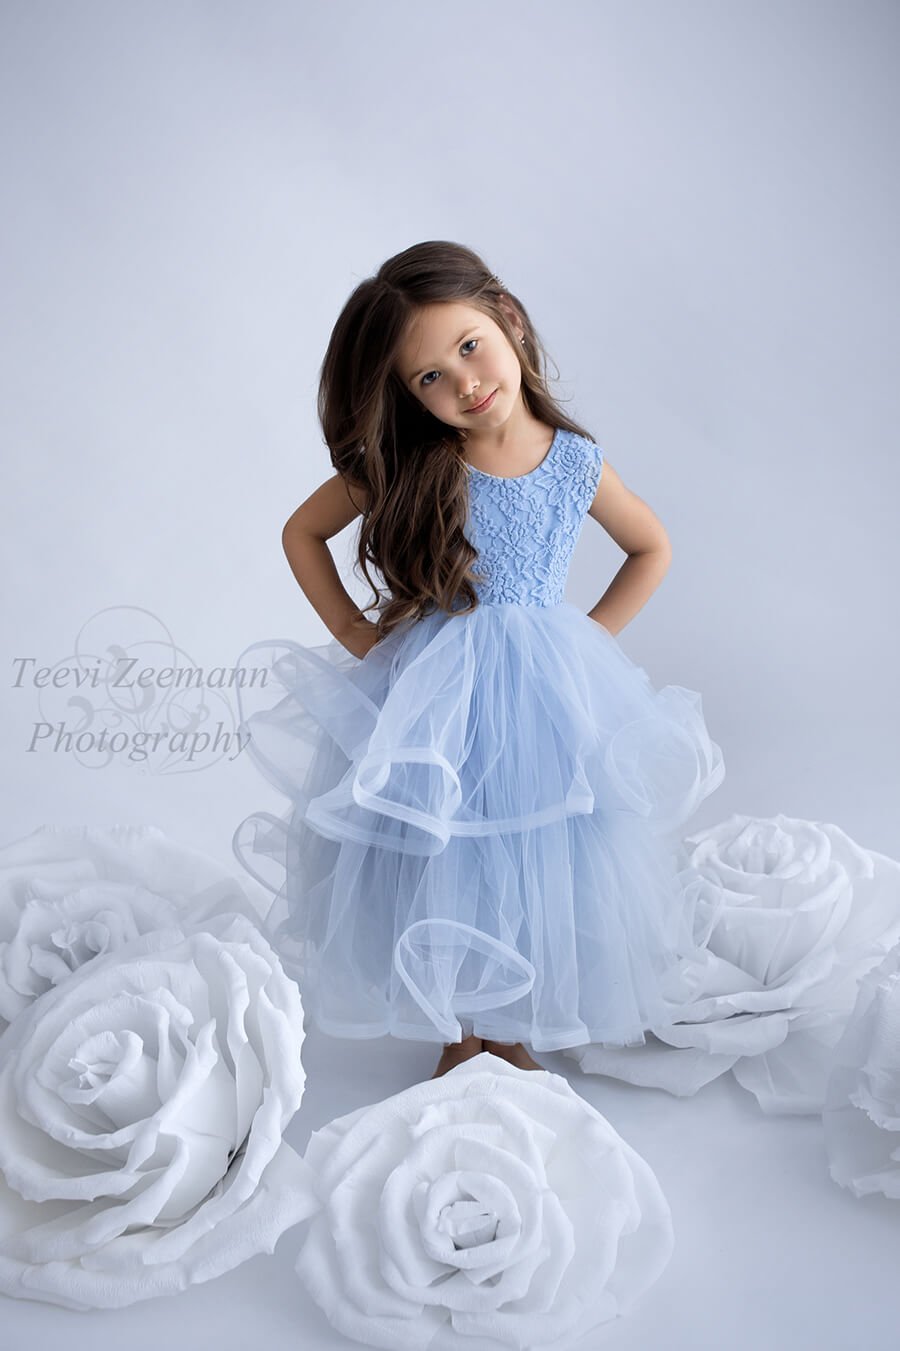 kid wears a light blue dress made of lace and tulle. she has both hands on her waist and the studio is decorated with white big roses.